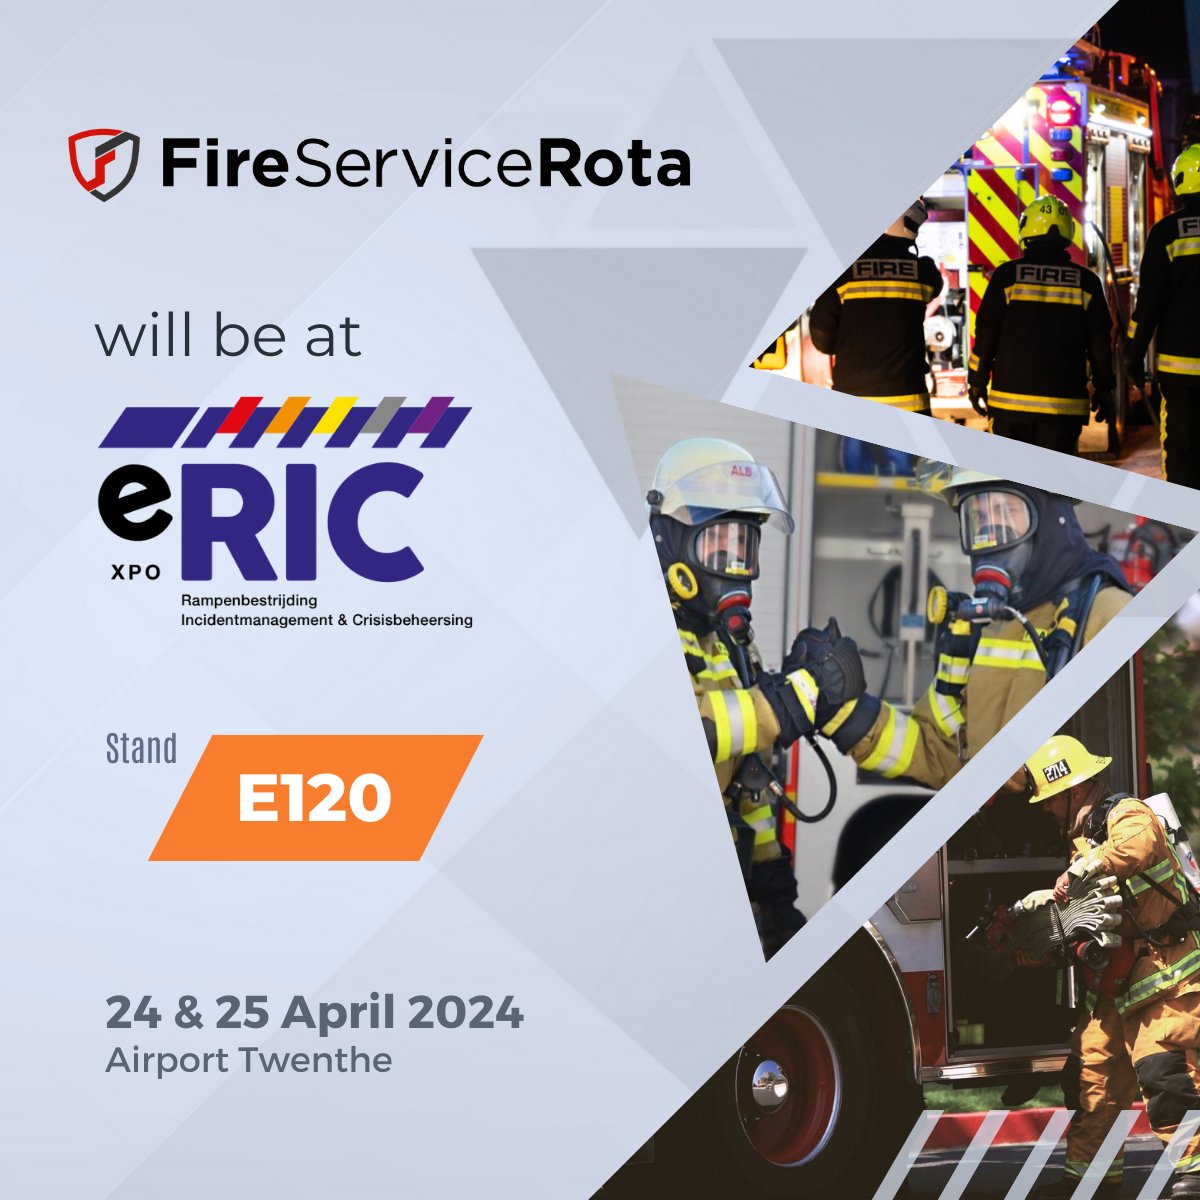 Meet our team at the Dutch tradeshow for Disaster control and Incident management. We will demonstrate our firefighter 👩🏻‍🚒 alerting 📟 capabilities together with our partners @firecom_nl and Safety Consulting Technology 

exporic.nl/nl/de-beurs/aa…